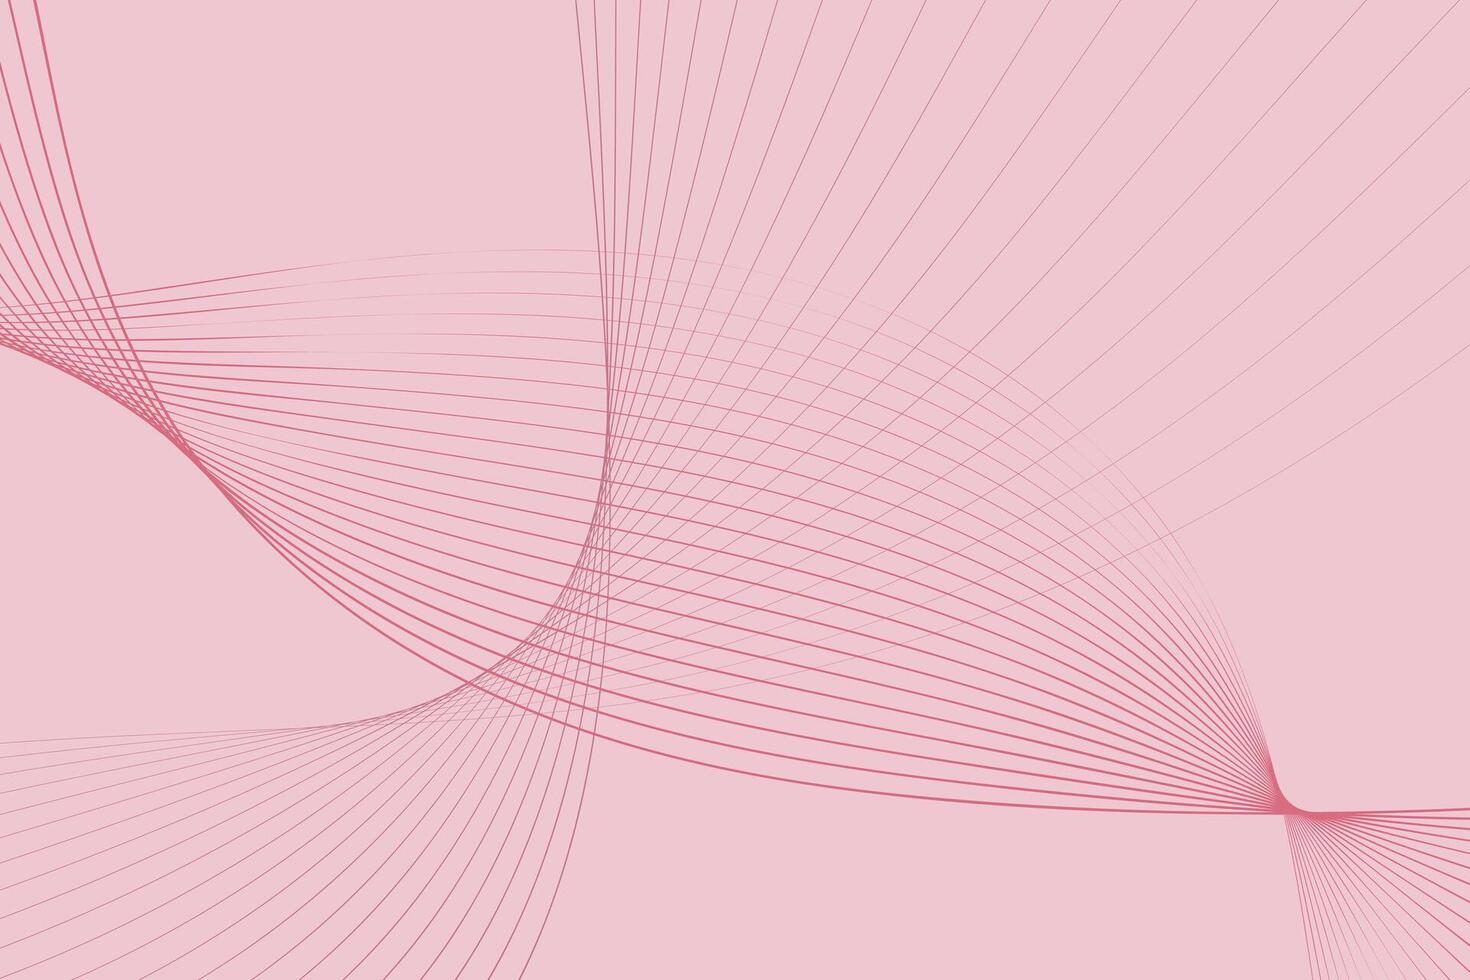 A vibrant pink background featuring intricate lines and curves creates a visually dynamic and captivating composition. The lines intersect and flow across the image, adding depth and movement vector